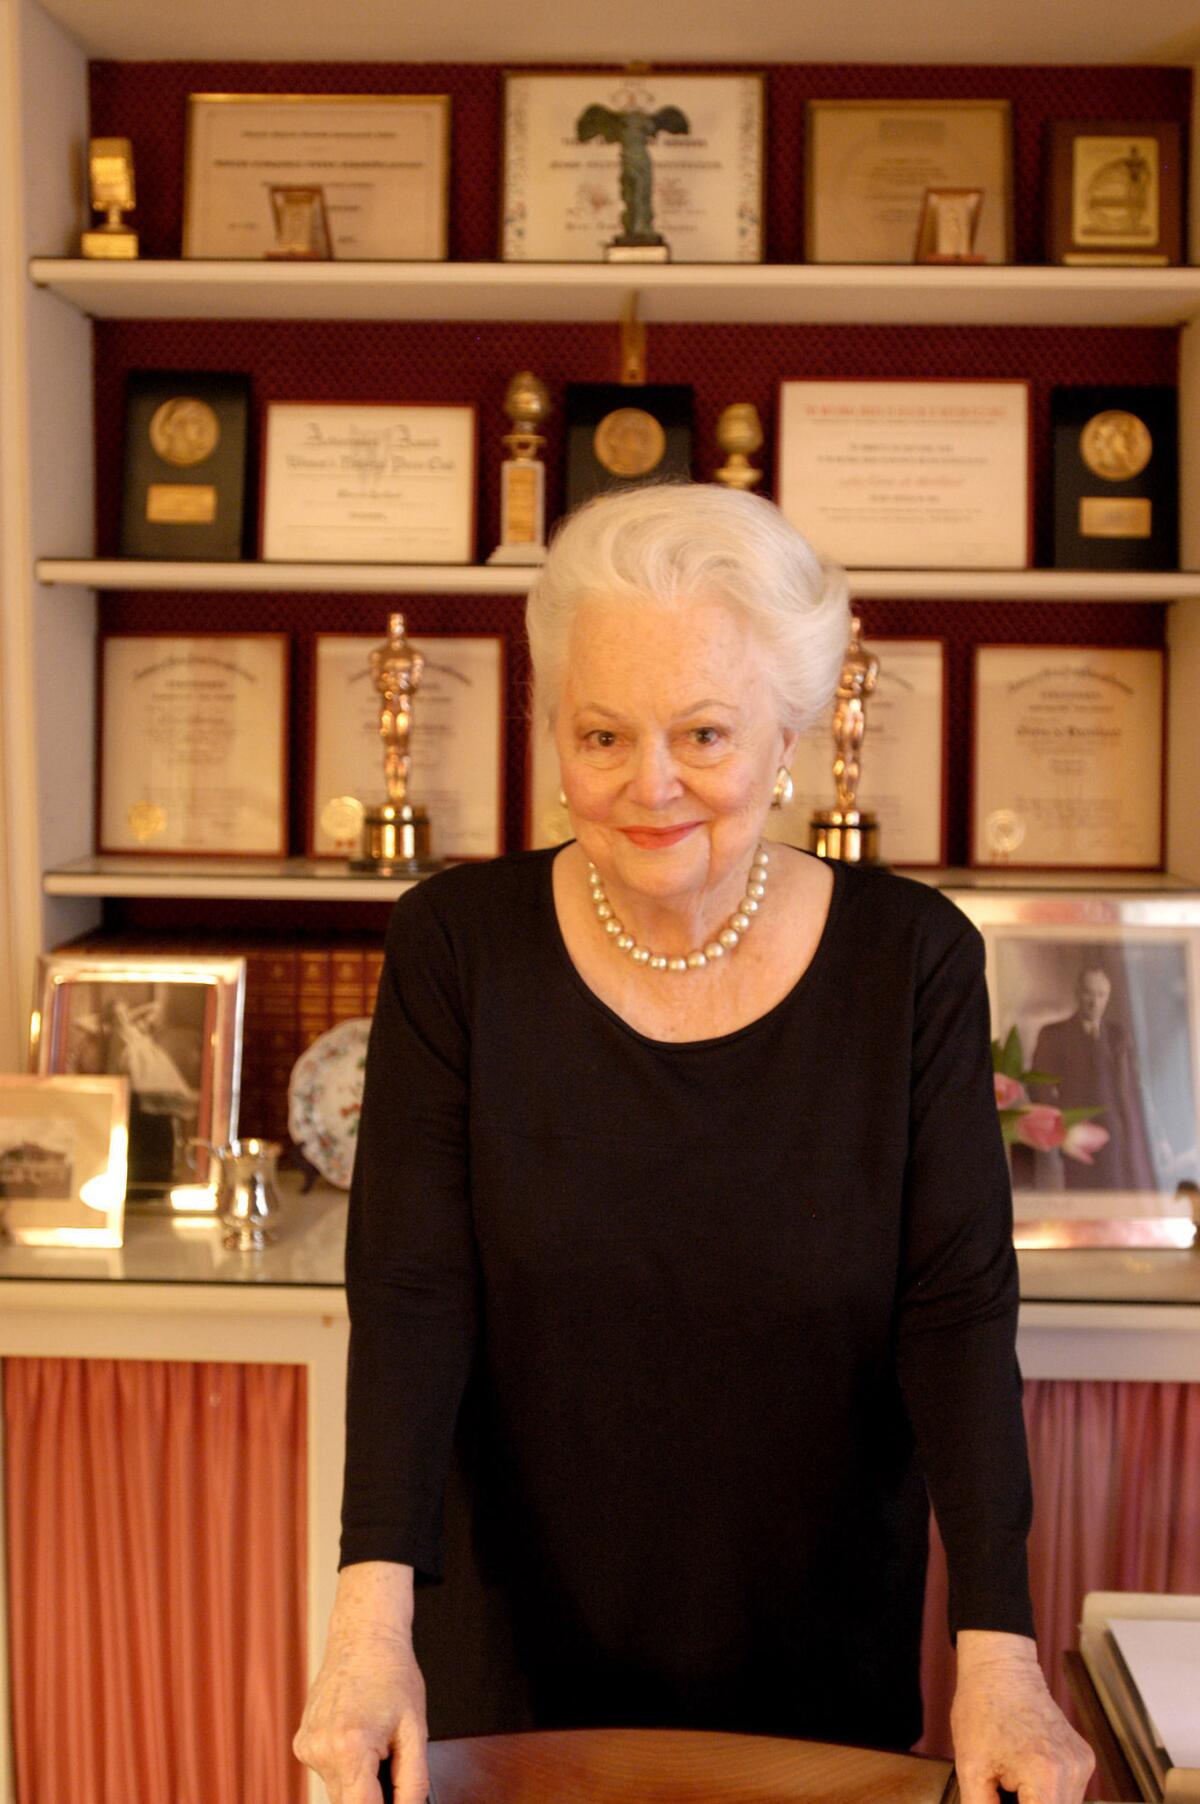 Actress Olivia de Havilland poses with her accolades at home in Paris in 2003. (Jean-Marc Giboux / Getty Images / For The Times)